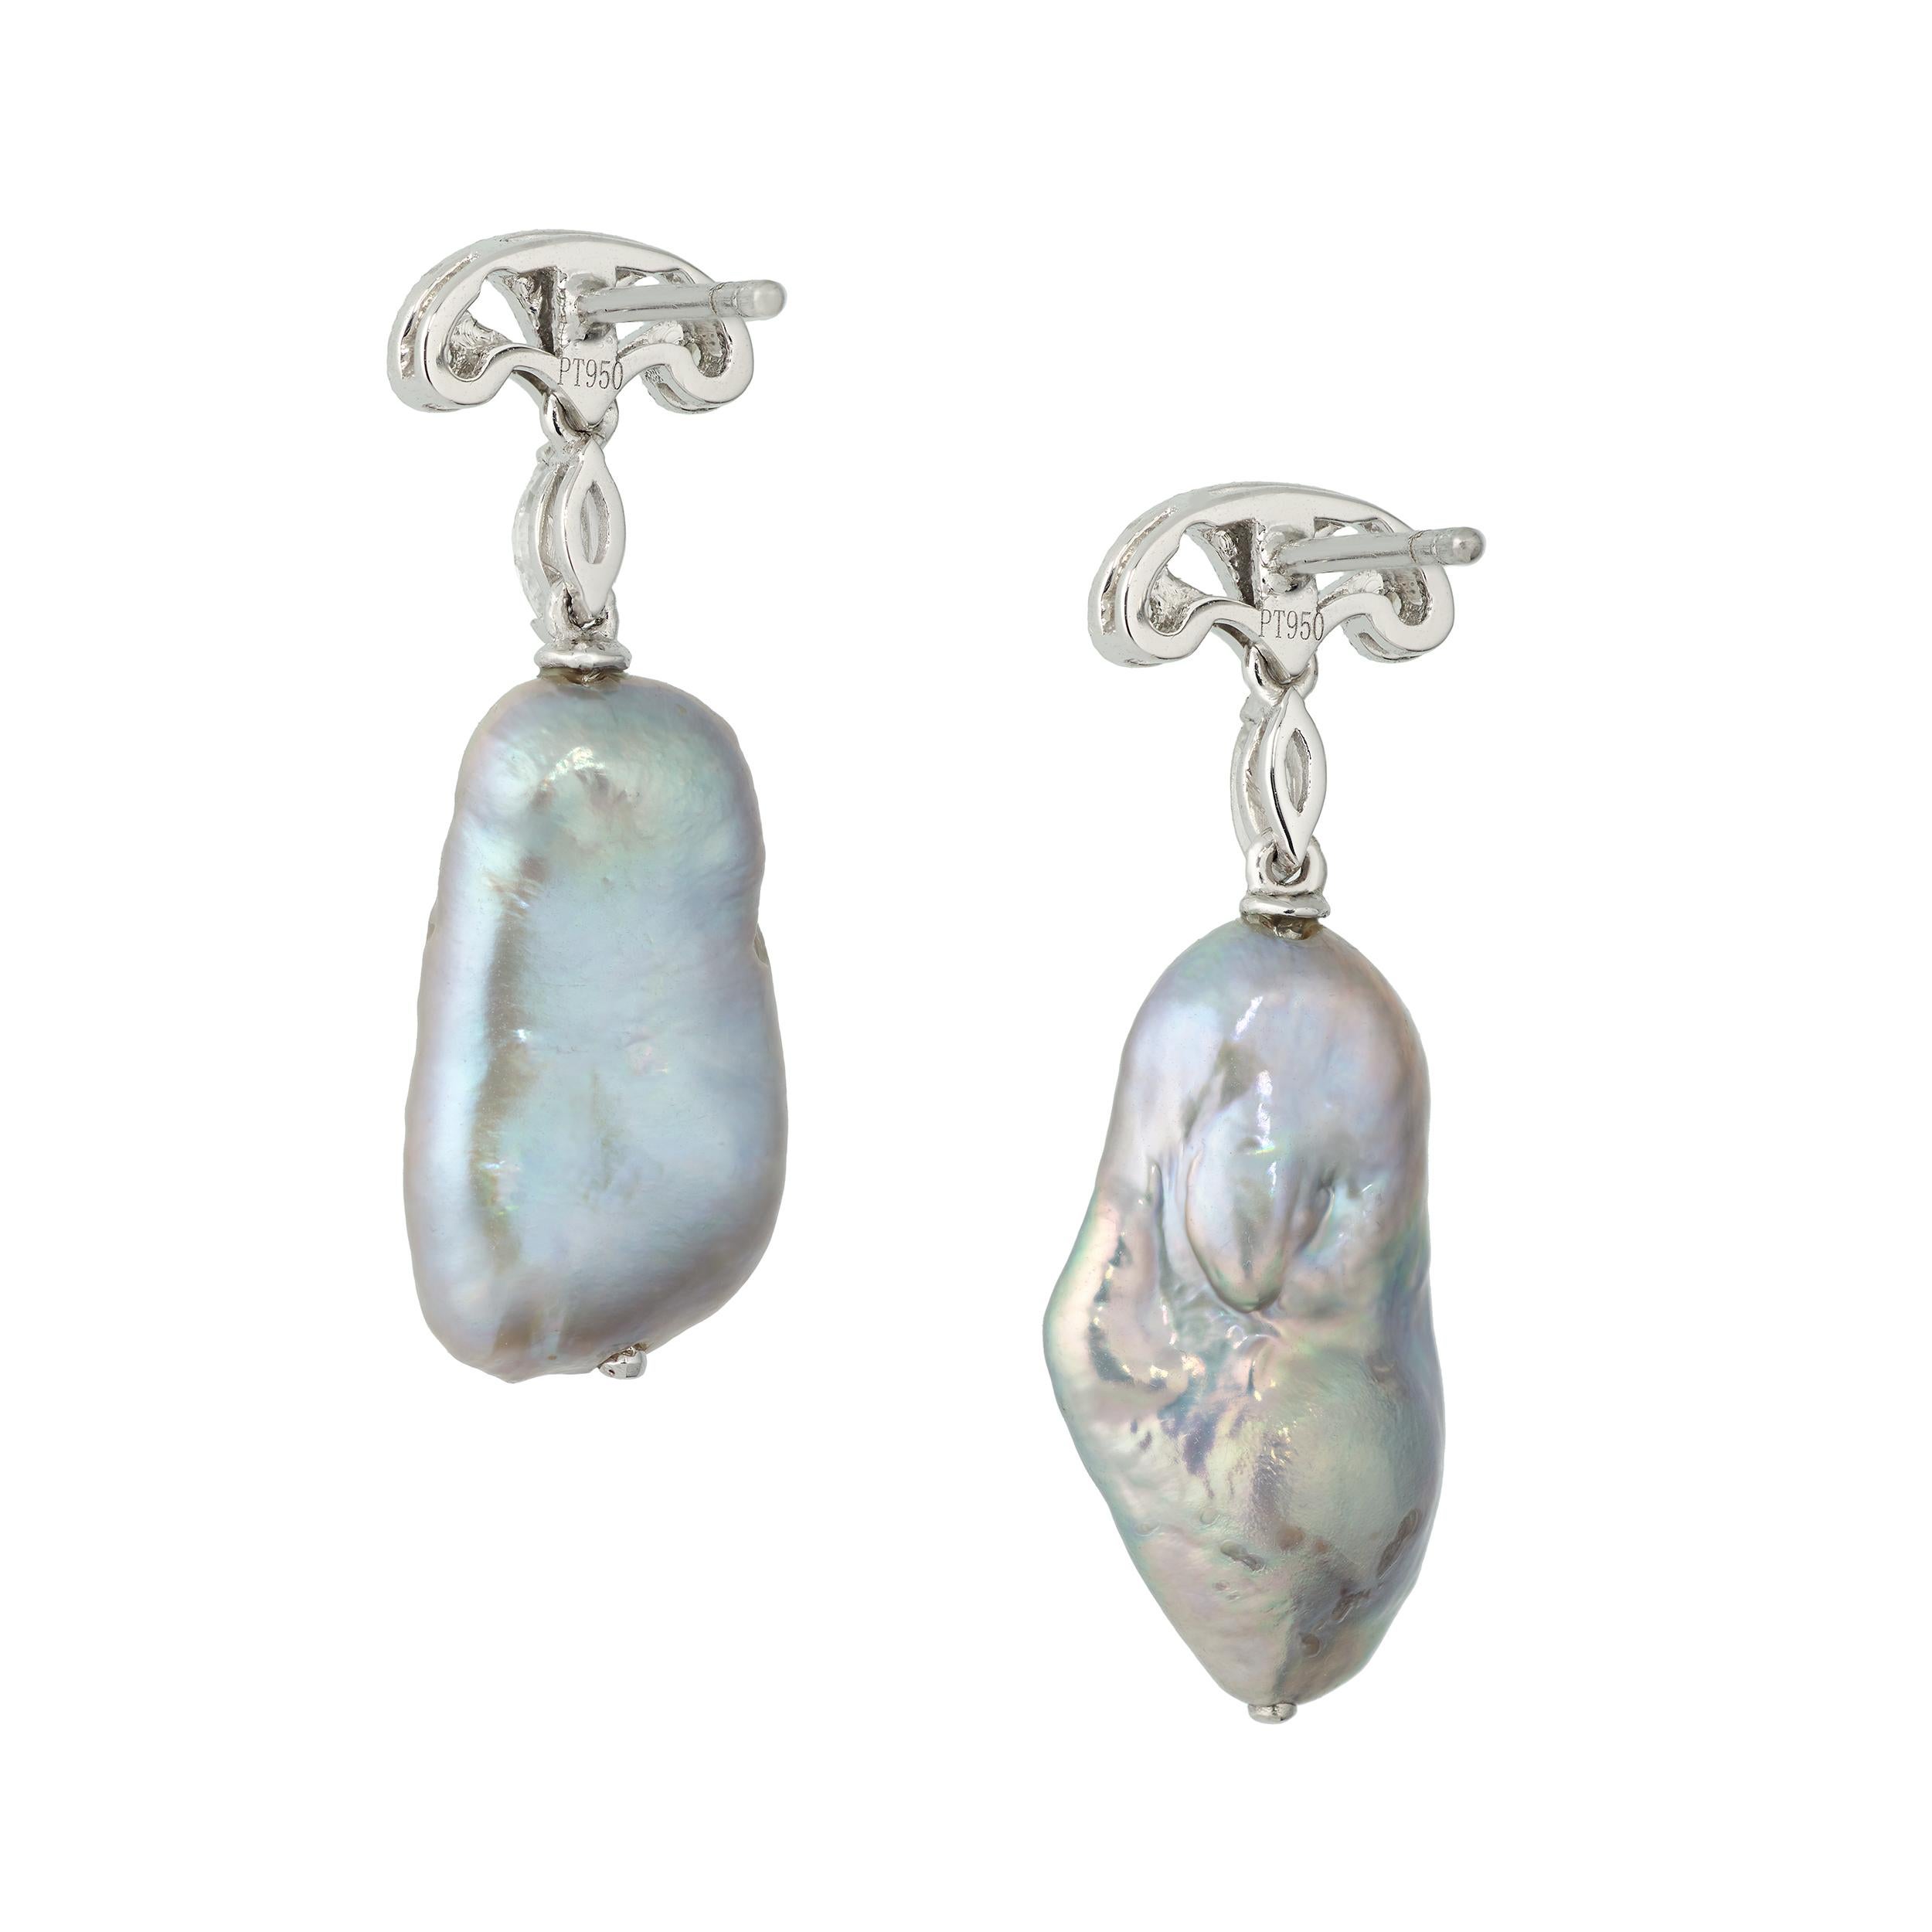 These lightweight and versatile drop earrings are suitable for most any occasion.  The gray freshwater pearls have a very lively iridescent luster.  Just above the pearl drop is a single Marquis Diamond connecting to the top of the earring with a